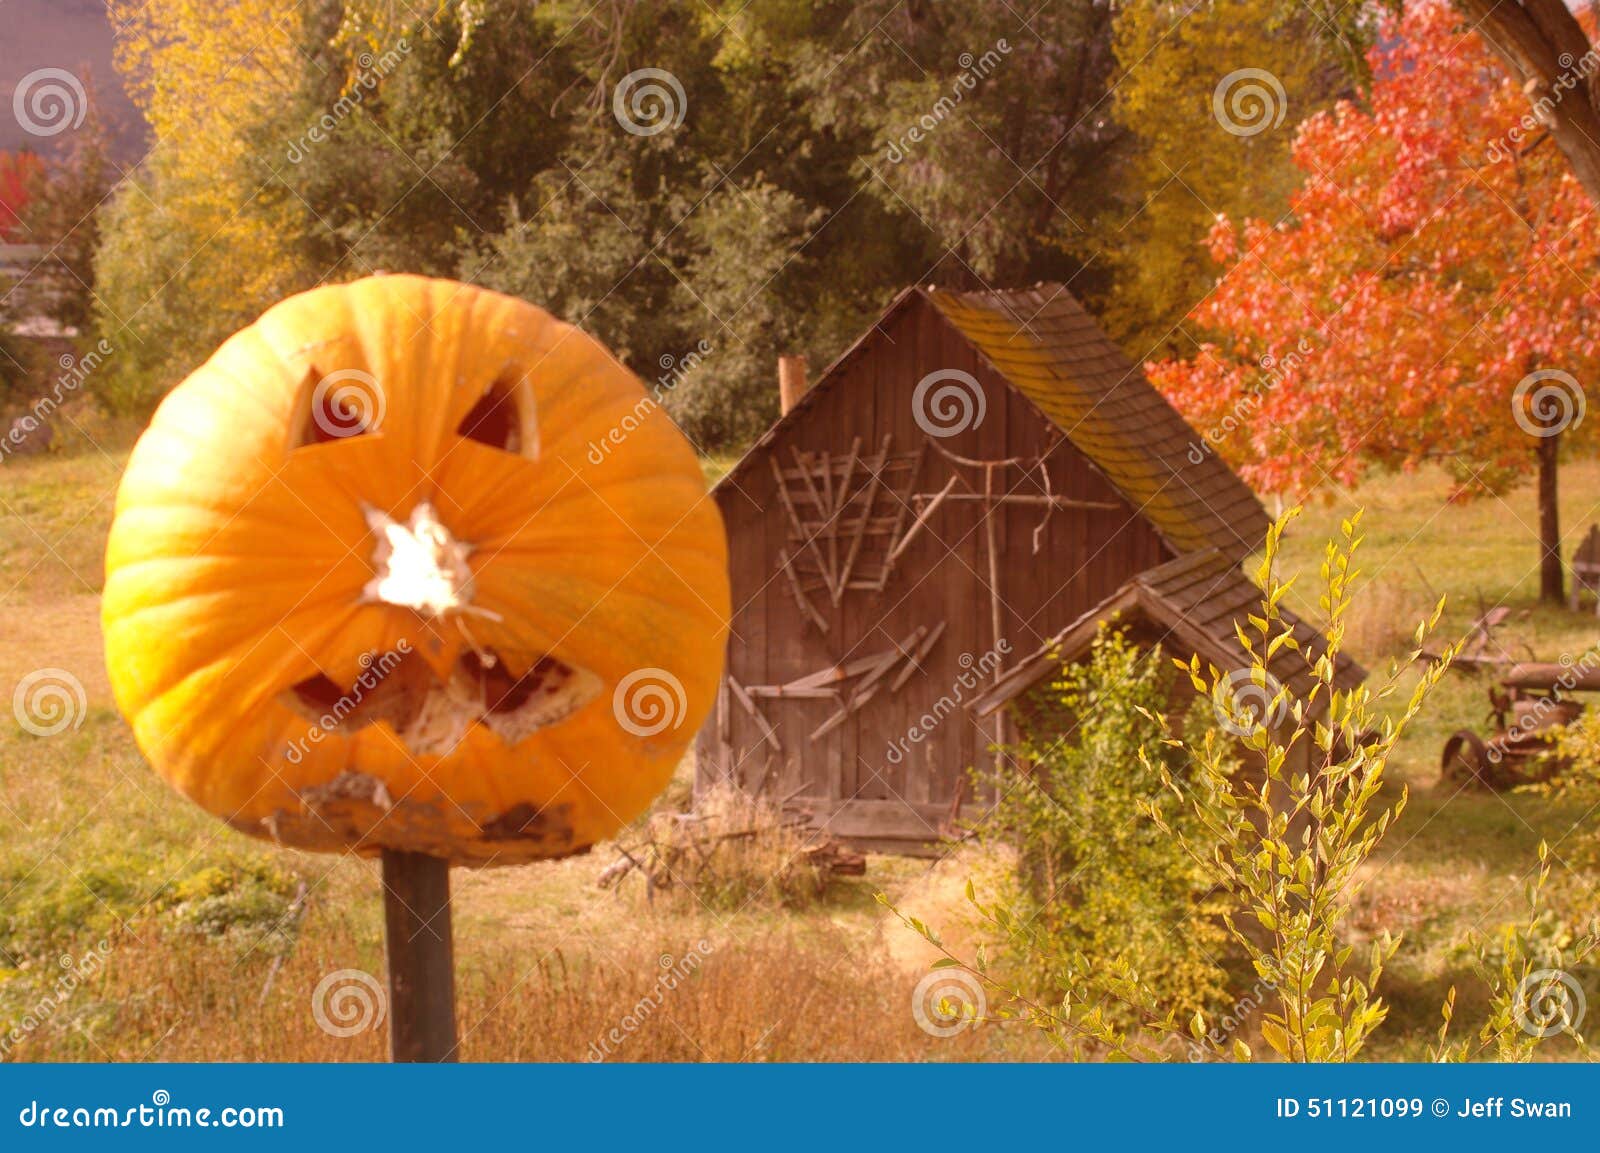 Pumpkin and haunted house stock image. Image of wood 